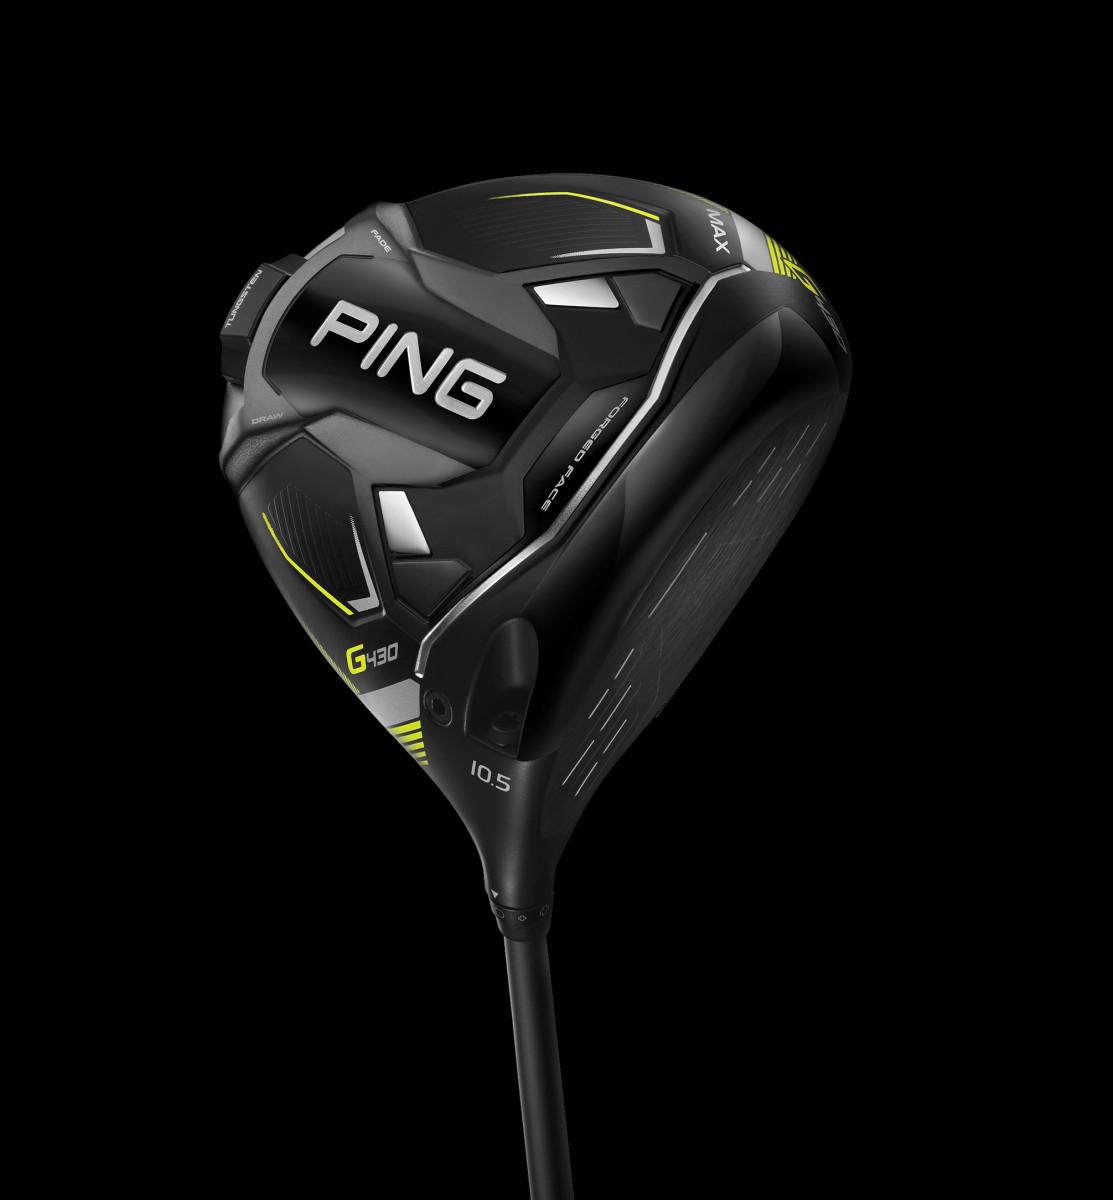 Ping's G430 Max driver